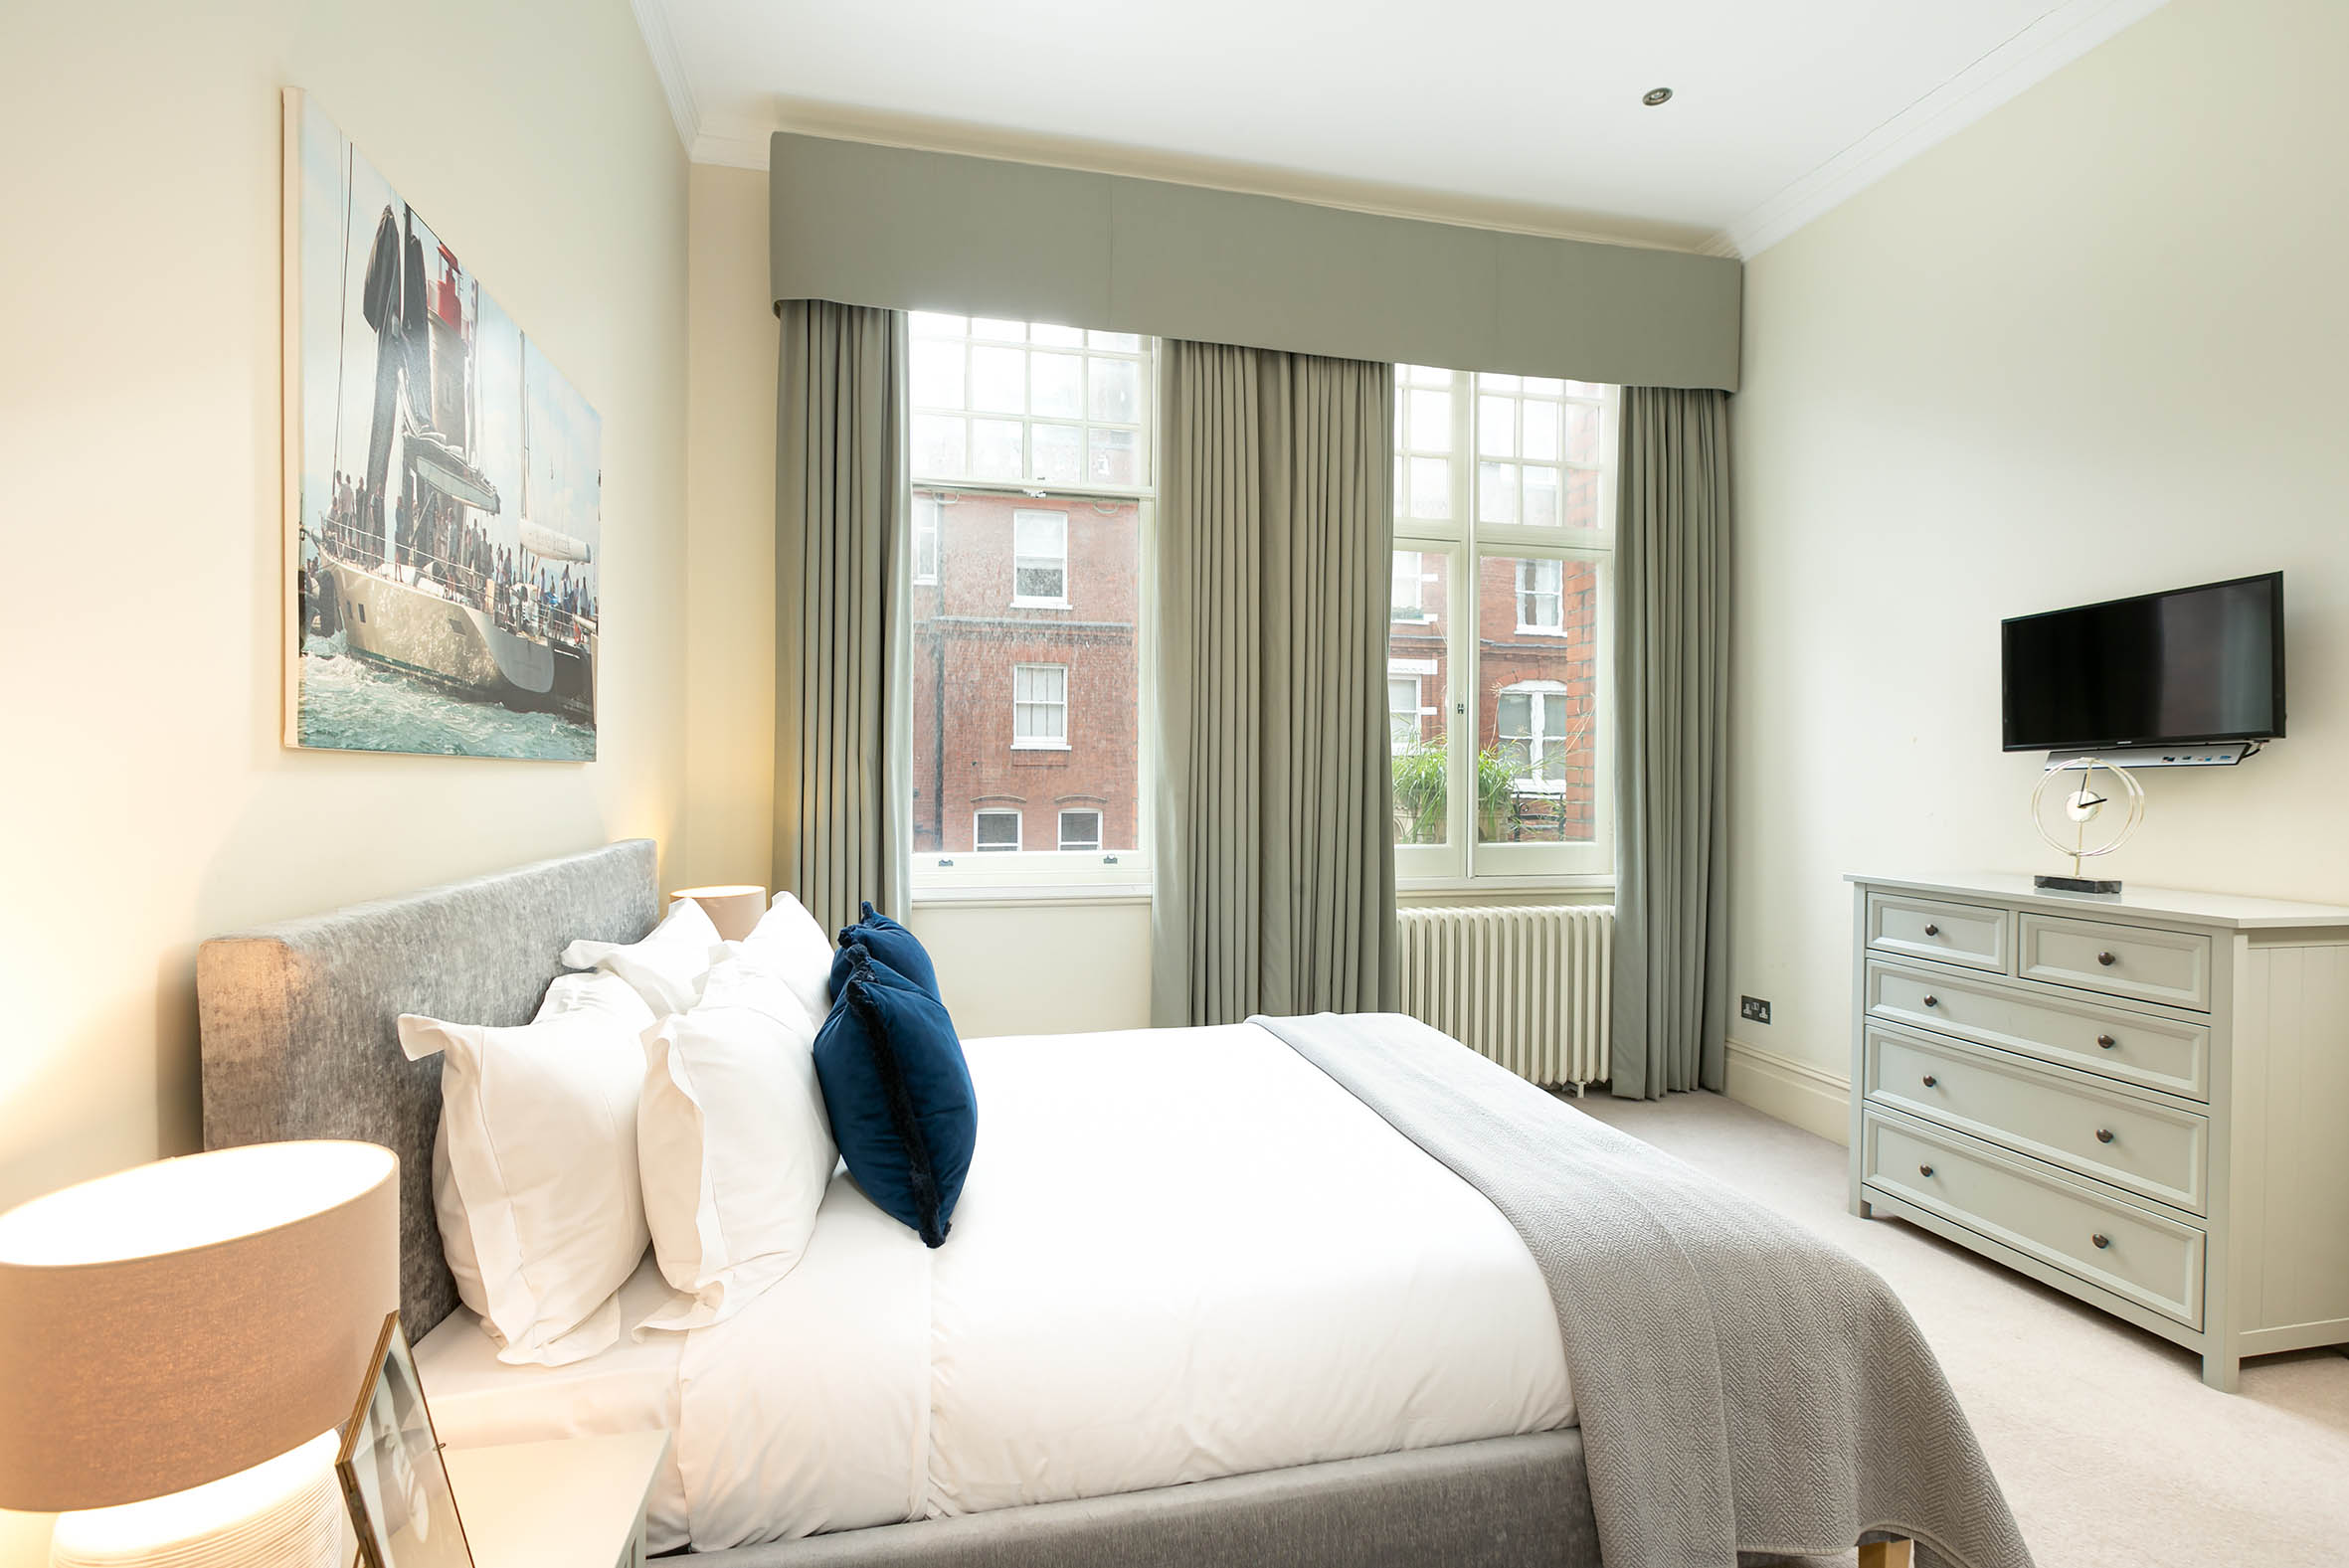 <p>Lovelydays Luxury Rentals introduce you pictures of a charming house in the heart of Knightsbridge</p>